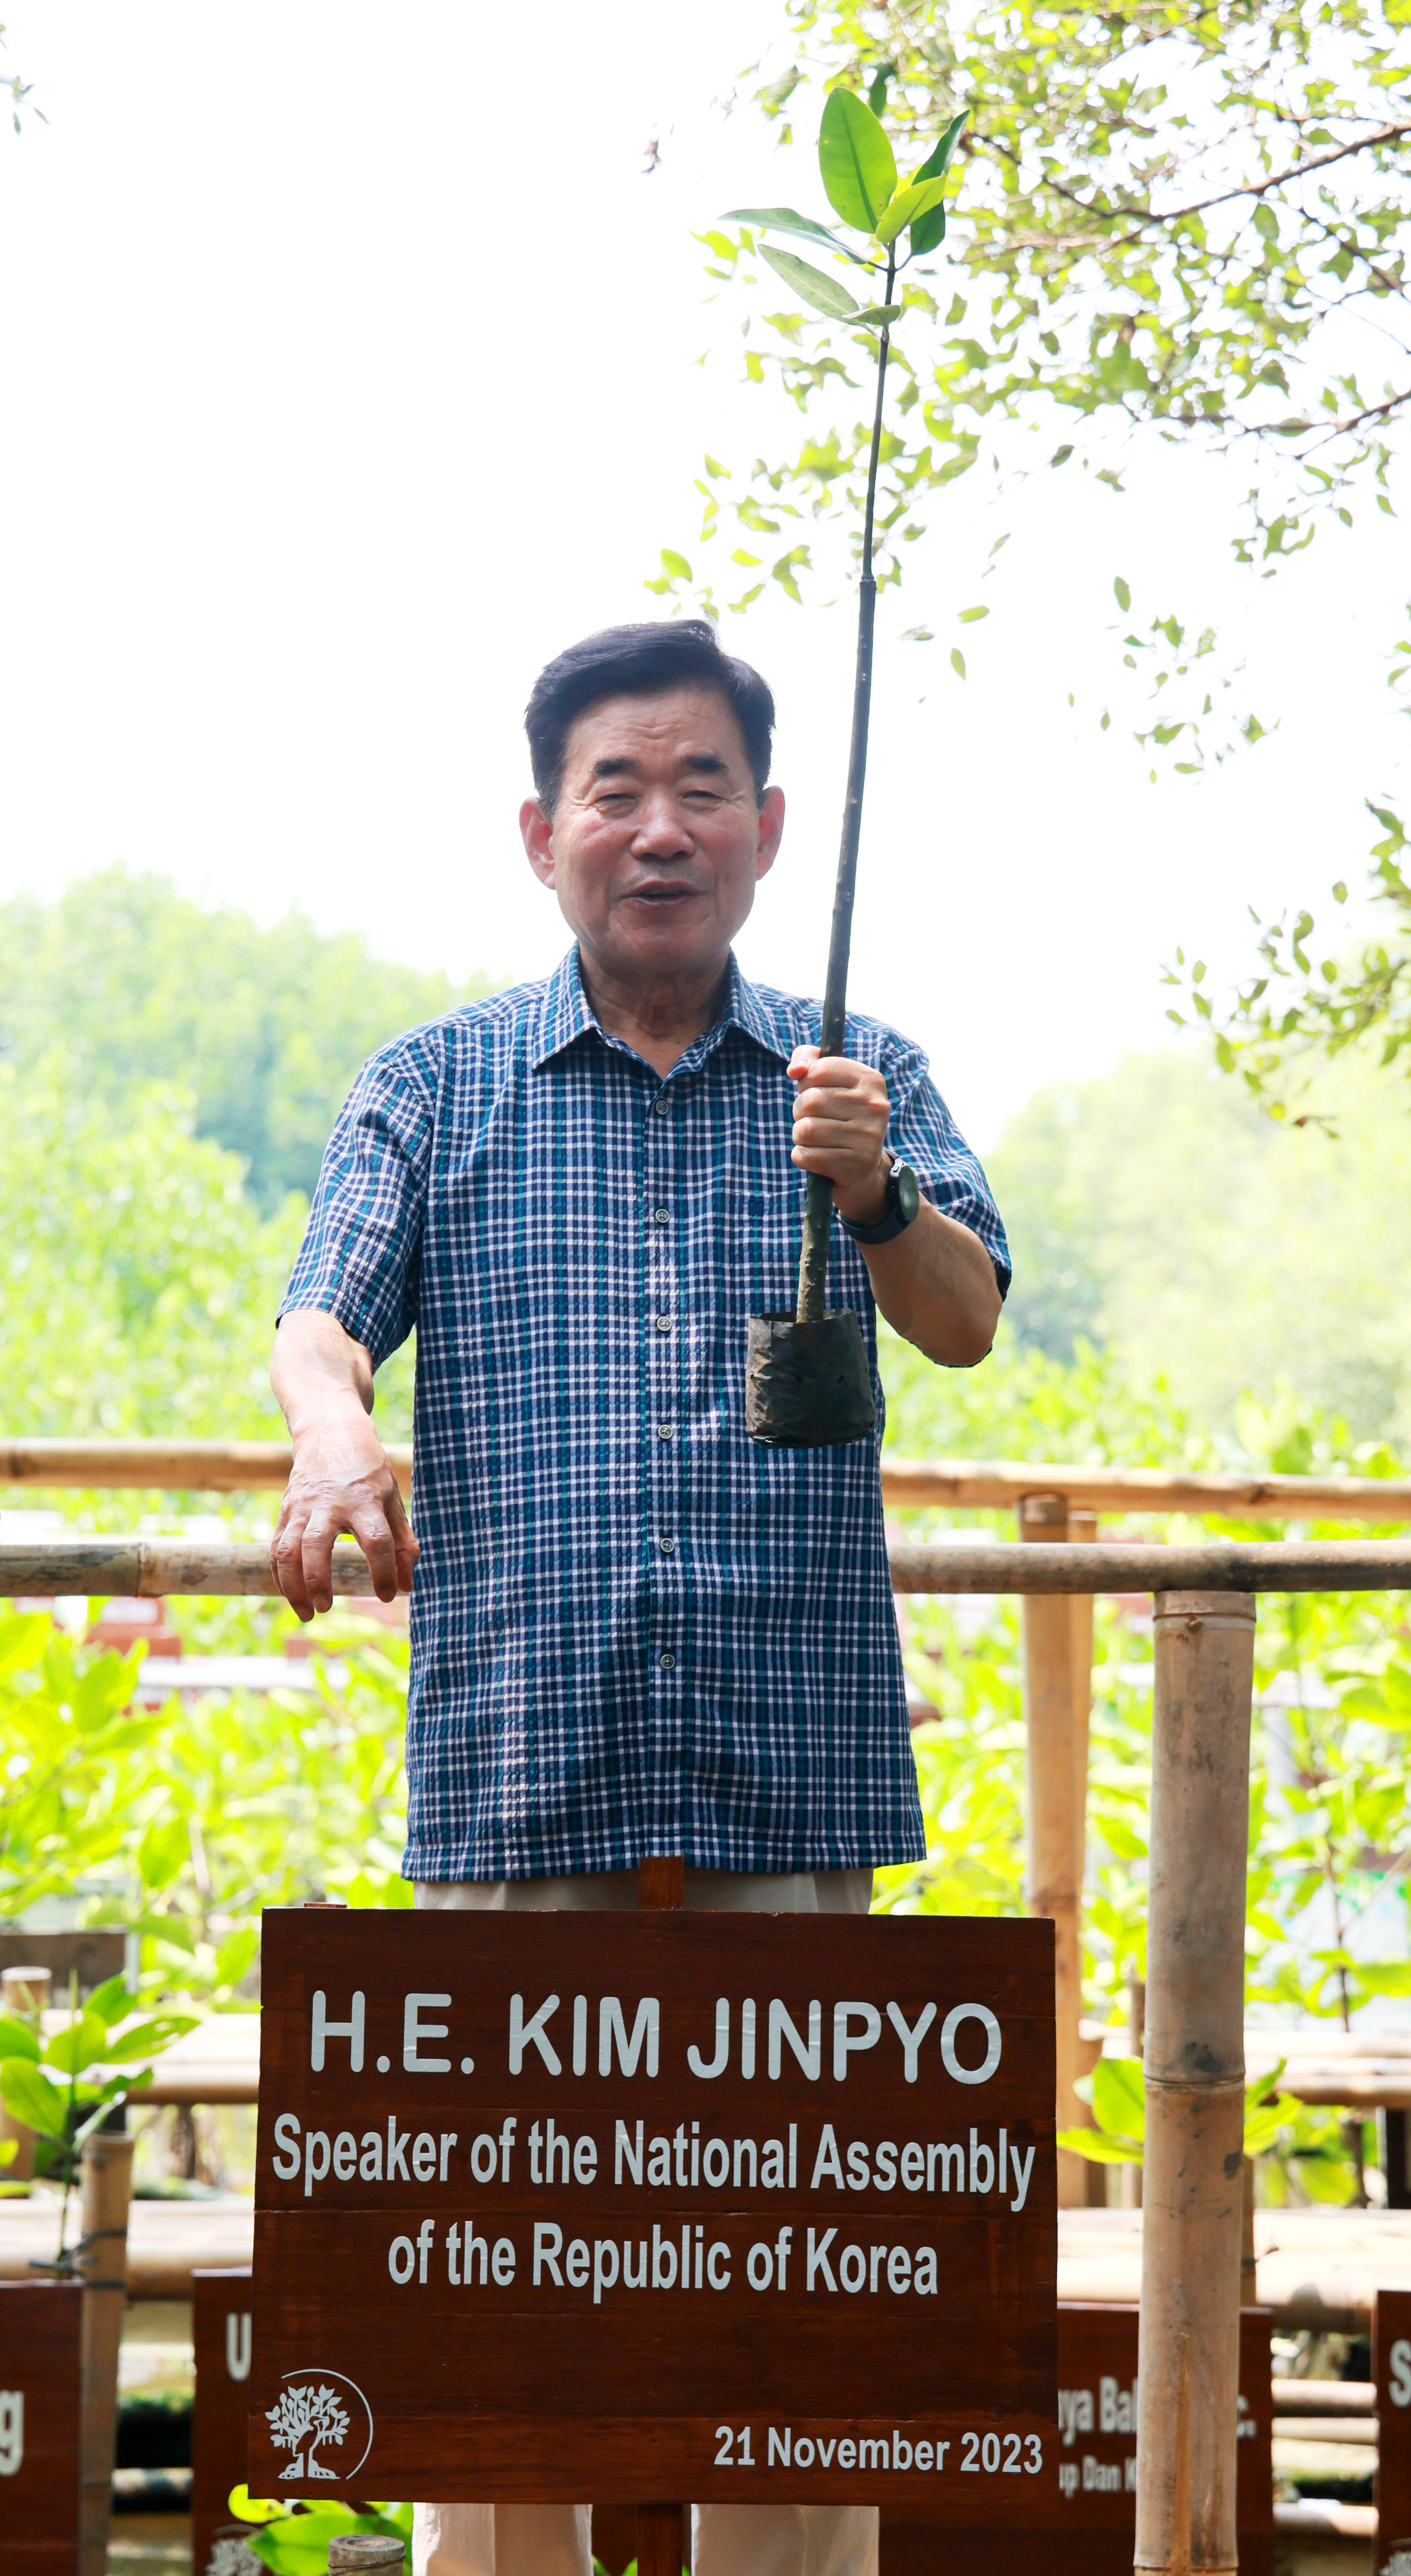 Speaker Kim Jin-pyo joins commemorative tree planting in Indonesian mangrove forest 관련사진 1 보기